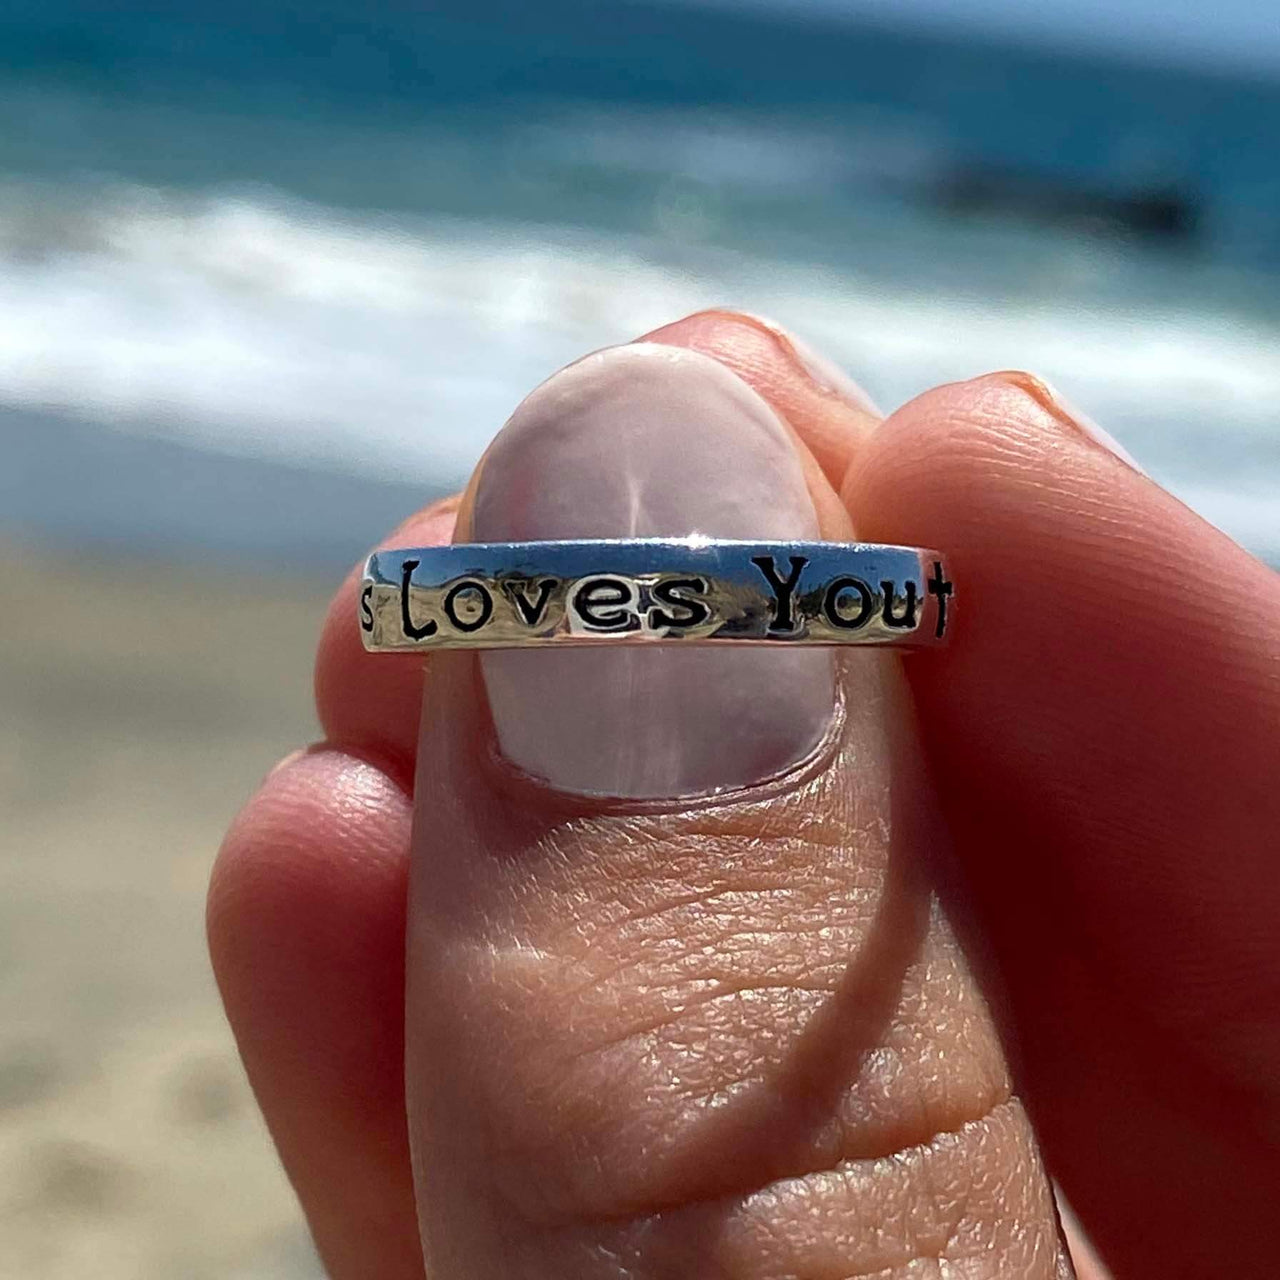 Jesus Loves You Ring Sterling Silver Jewelry